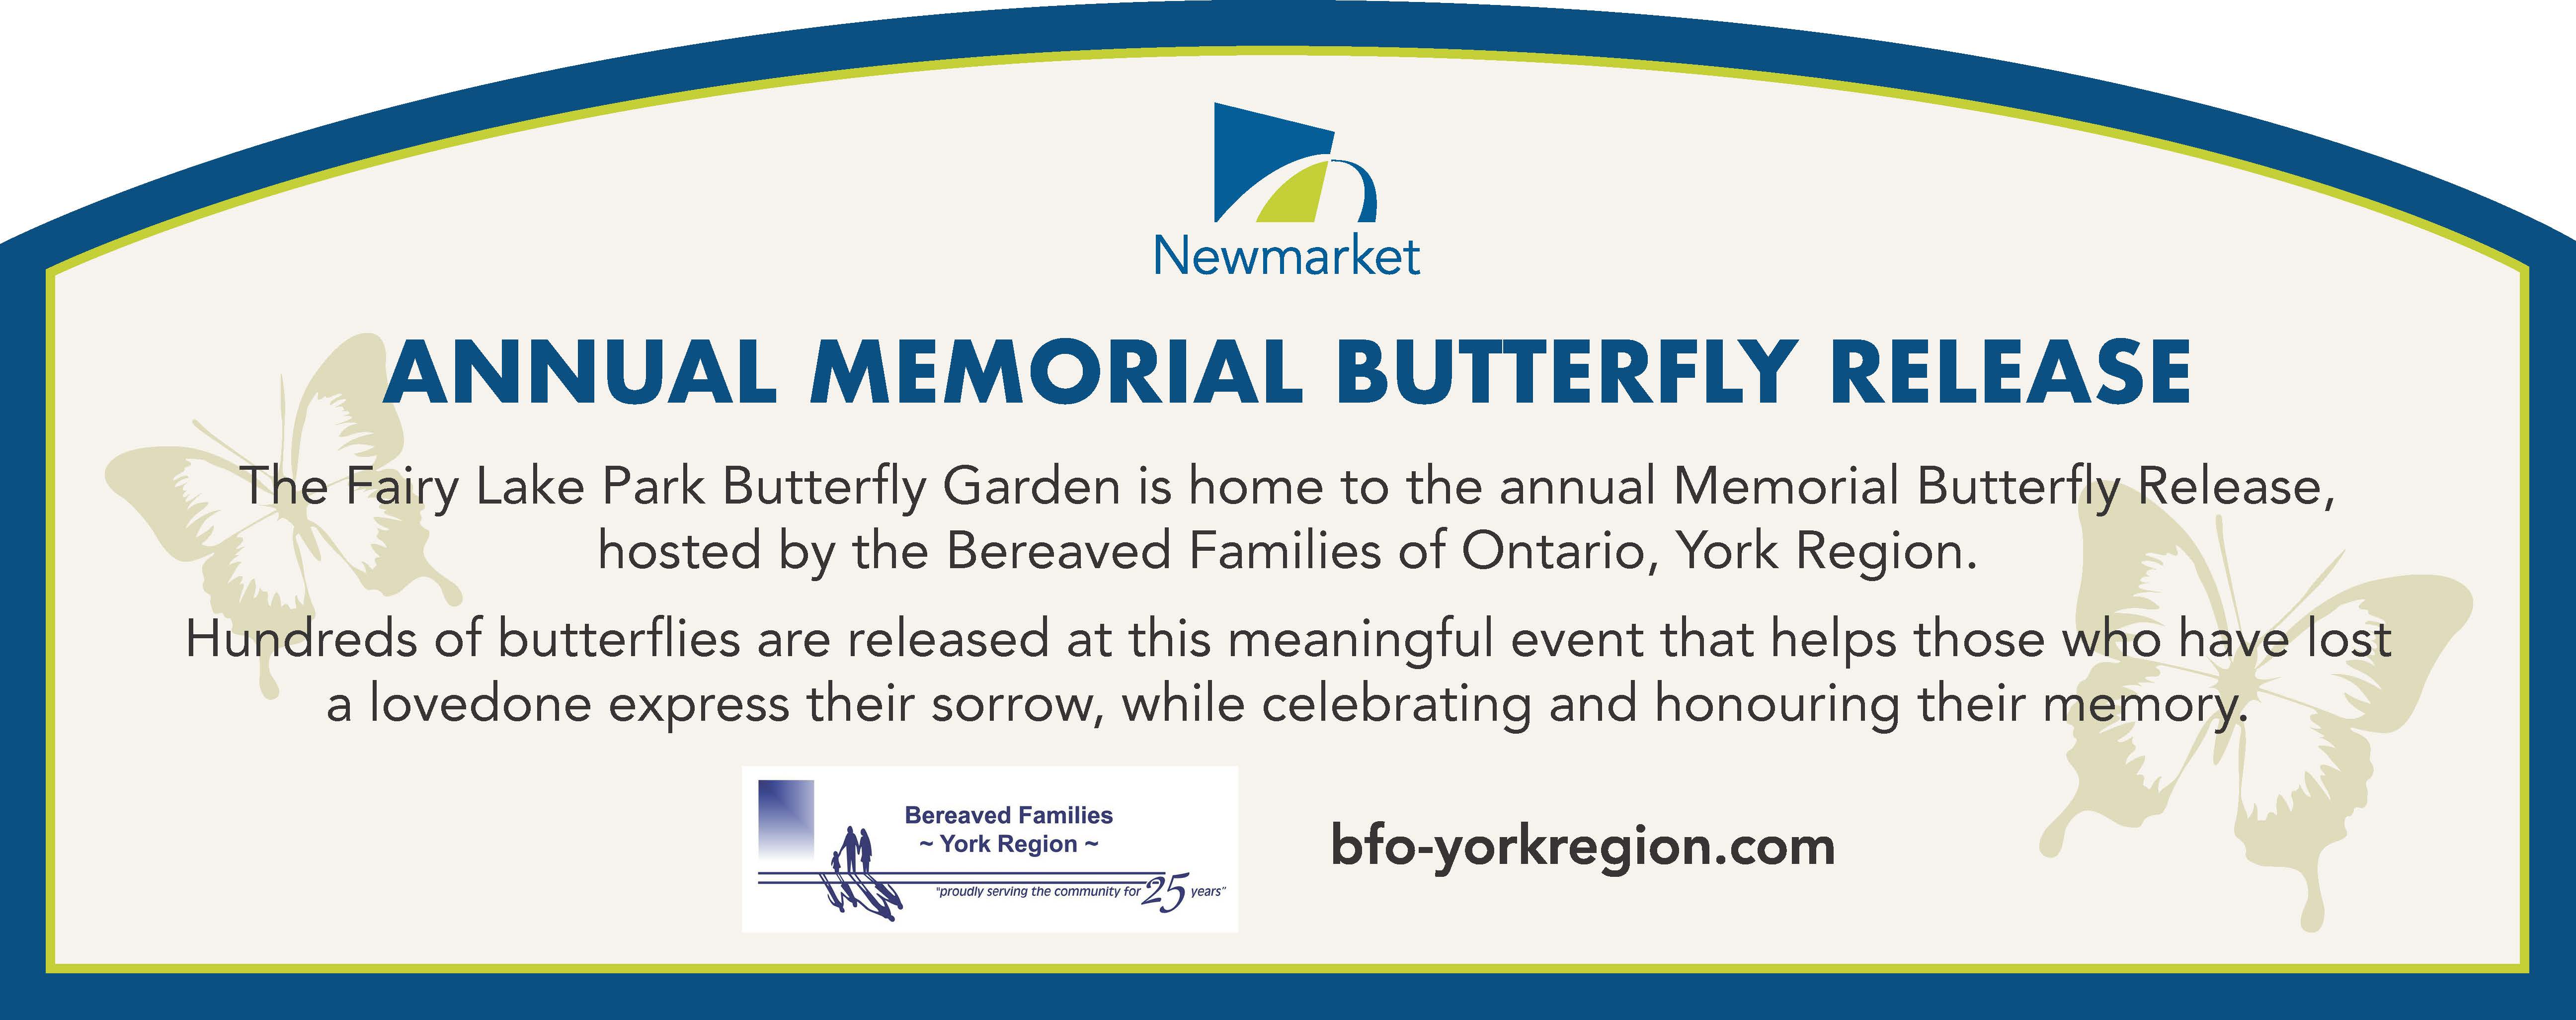 Notice of the Newmarket Annual Memorial Butterfly Release